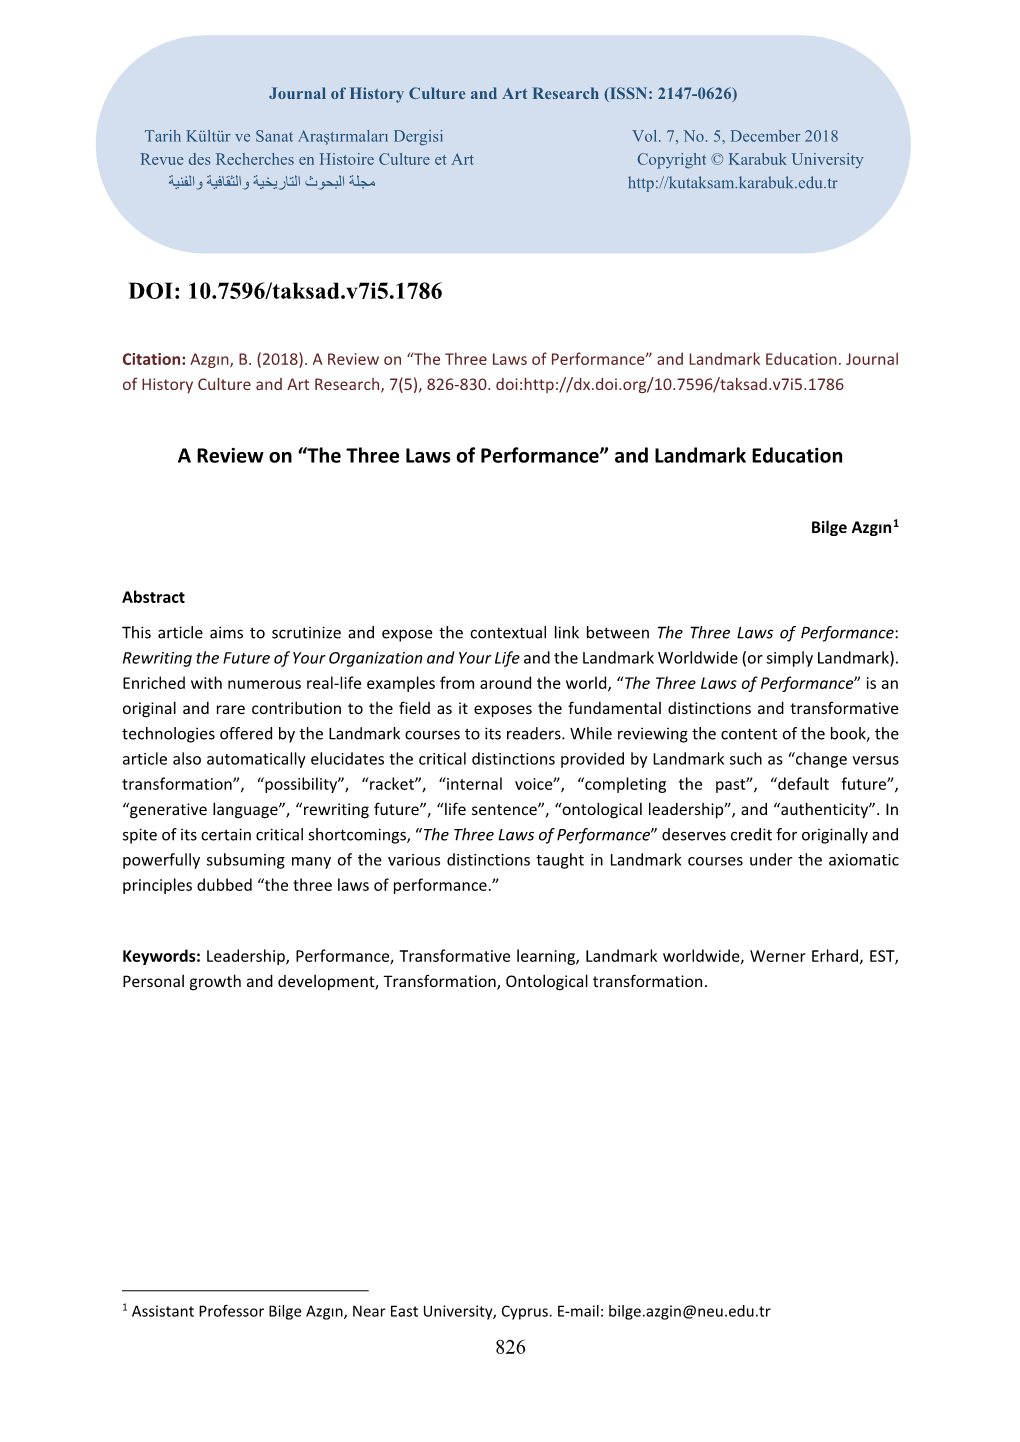 A Review on “The Three Laws of Performance” and Landmark Education